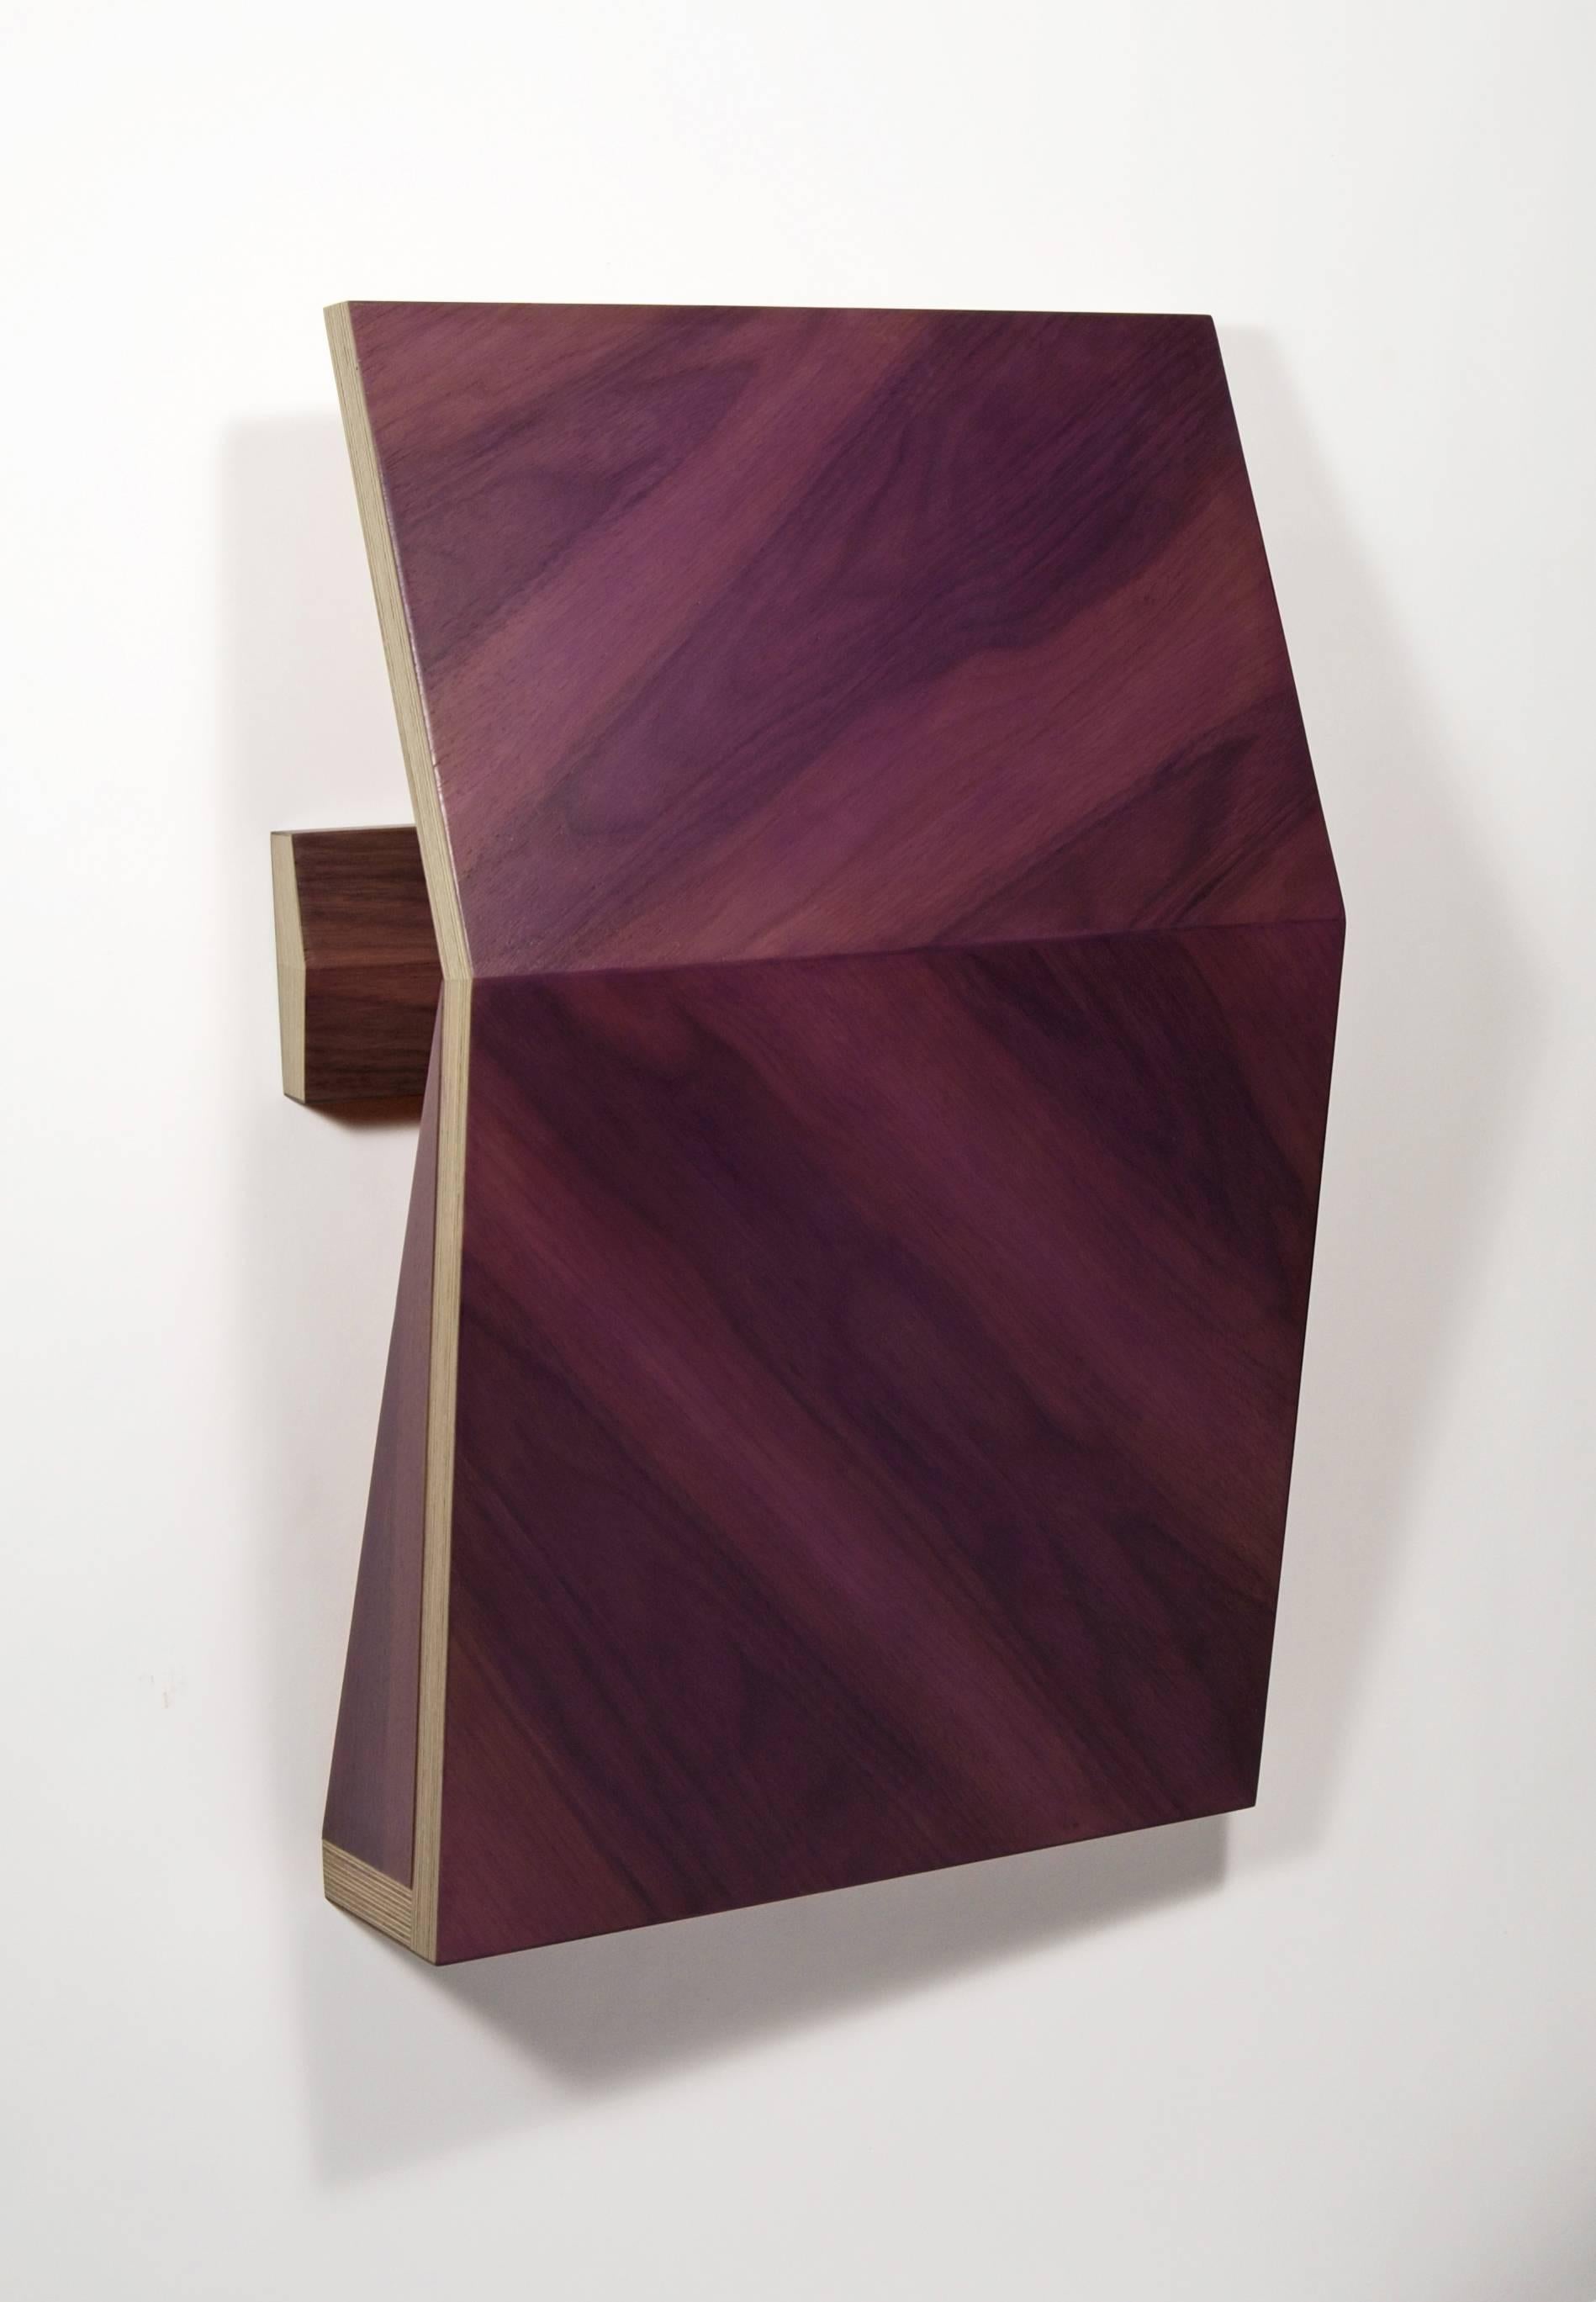 Architecture and functional objects inform the vocabulary of Richard Bottwin’s sculpture.  The plywood surfaces, laminated with wood veneers or painted with acrylic colors, are configured to reveal surprising shapes and patterns with shifts in the